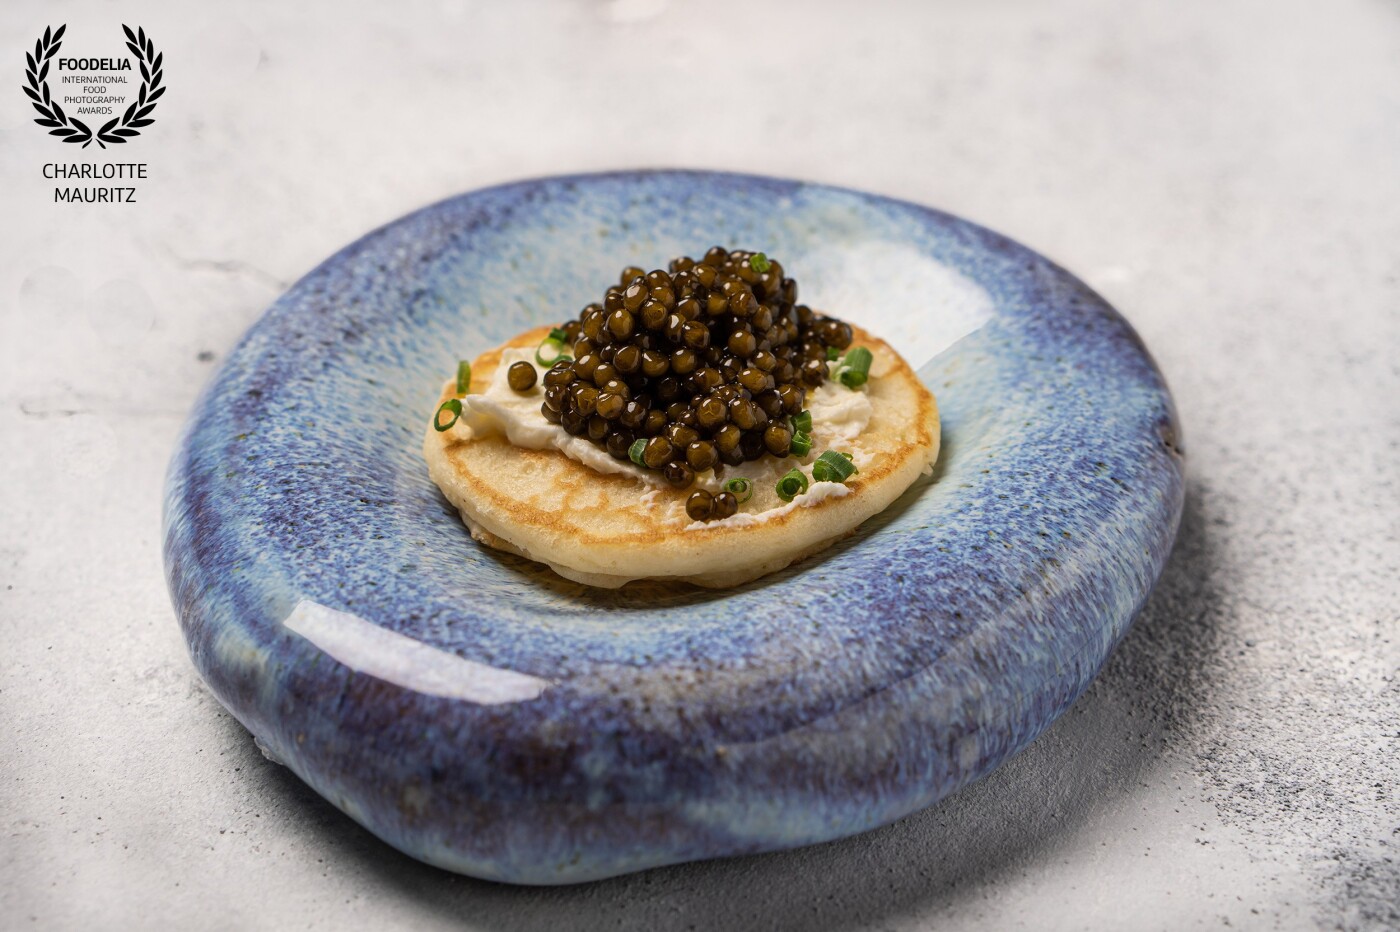 Started our birthday dinner with caviar from Restaurant Mos. Served on a beautiful plate of Maravillas Ceramics. Always a good way to start your dinner! 